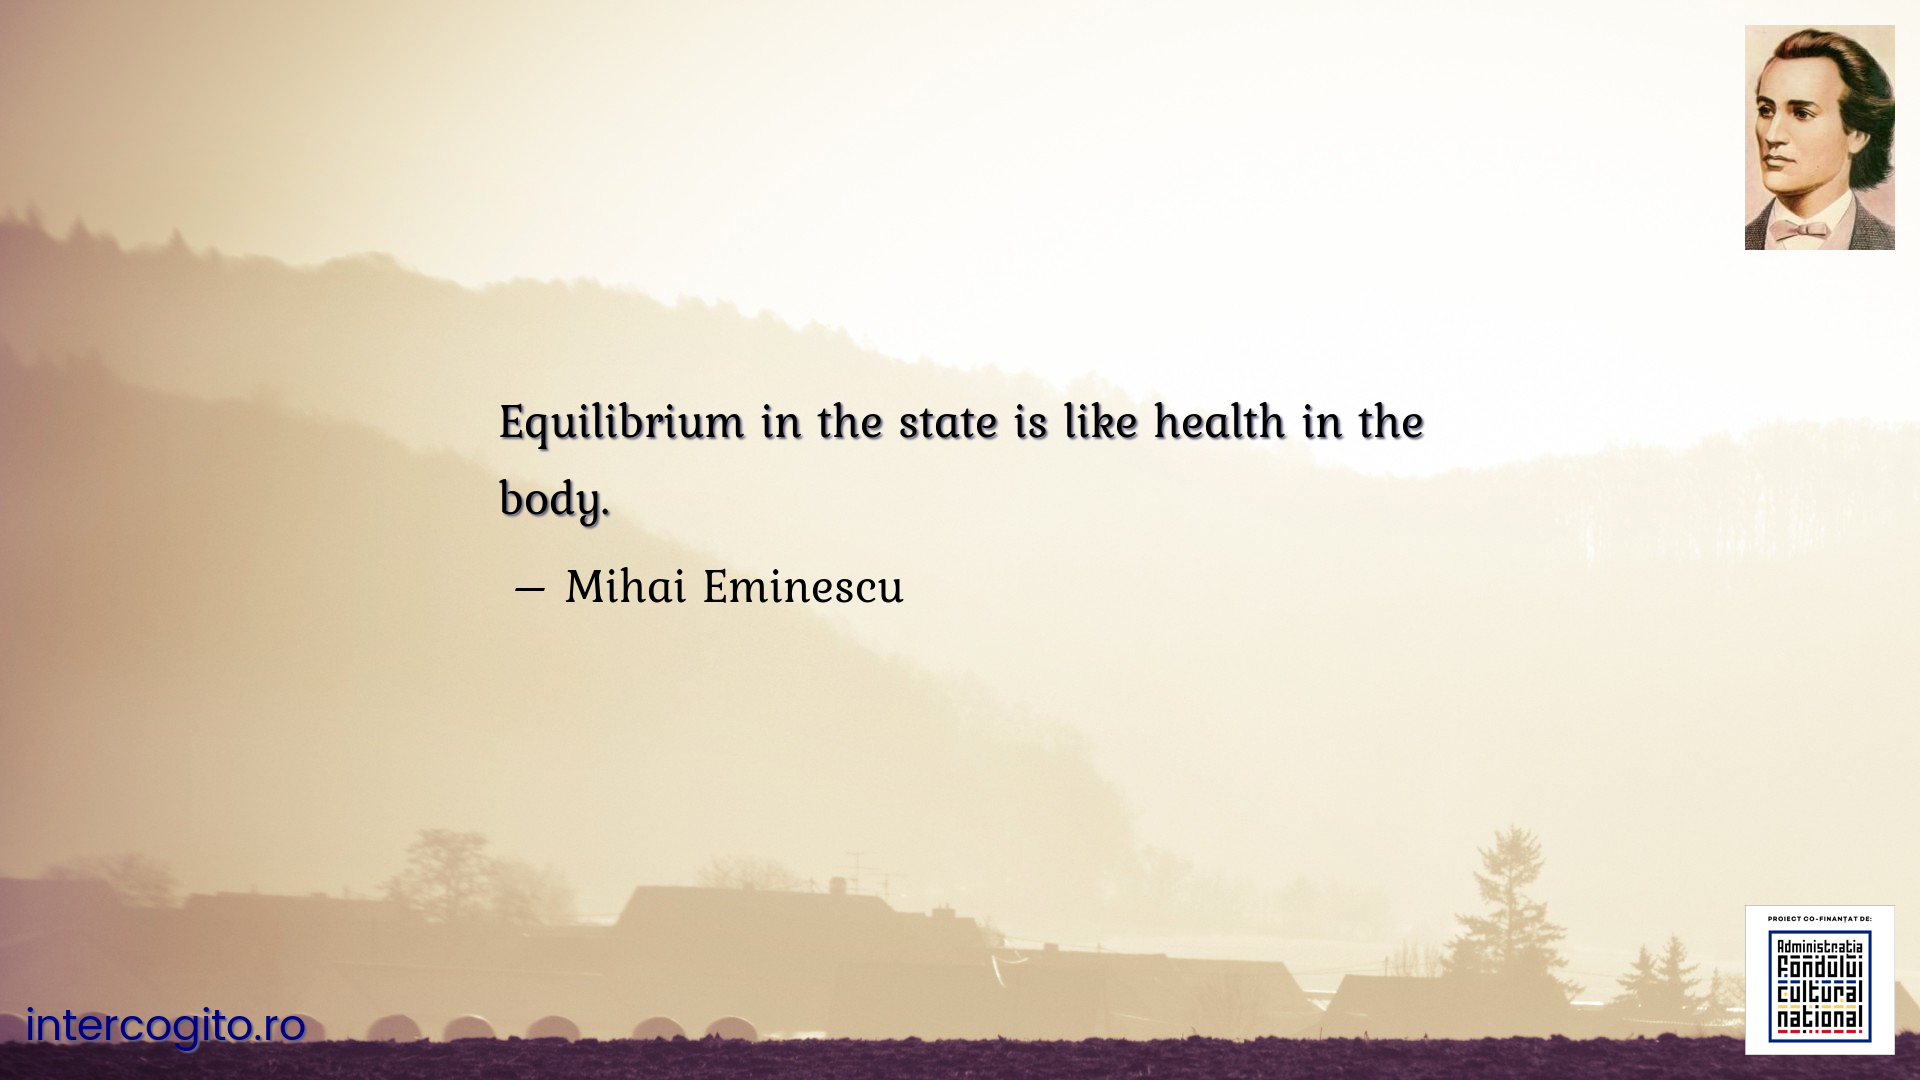 Equilibrium in the state is like health in the body.